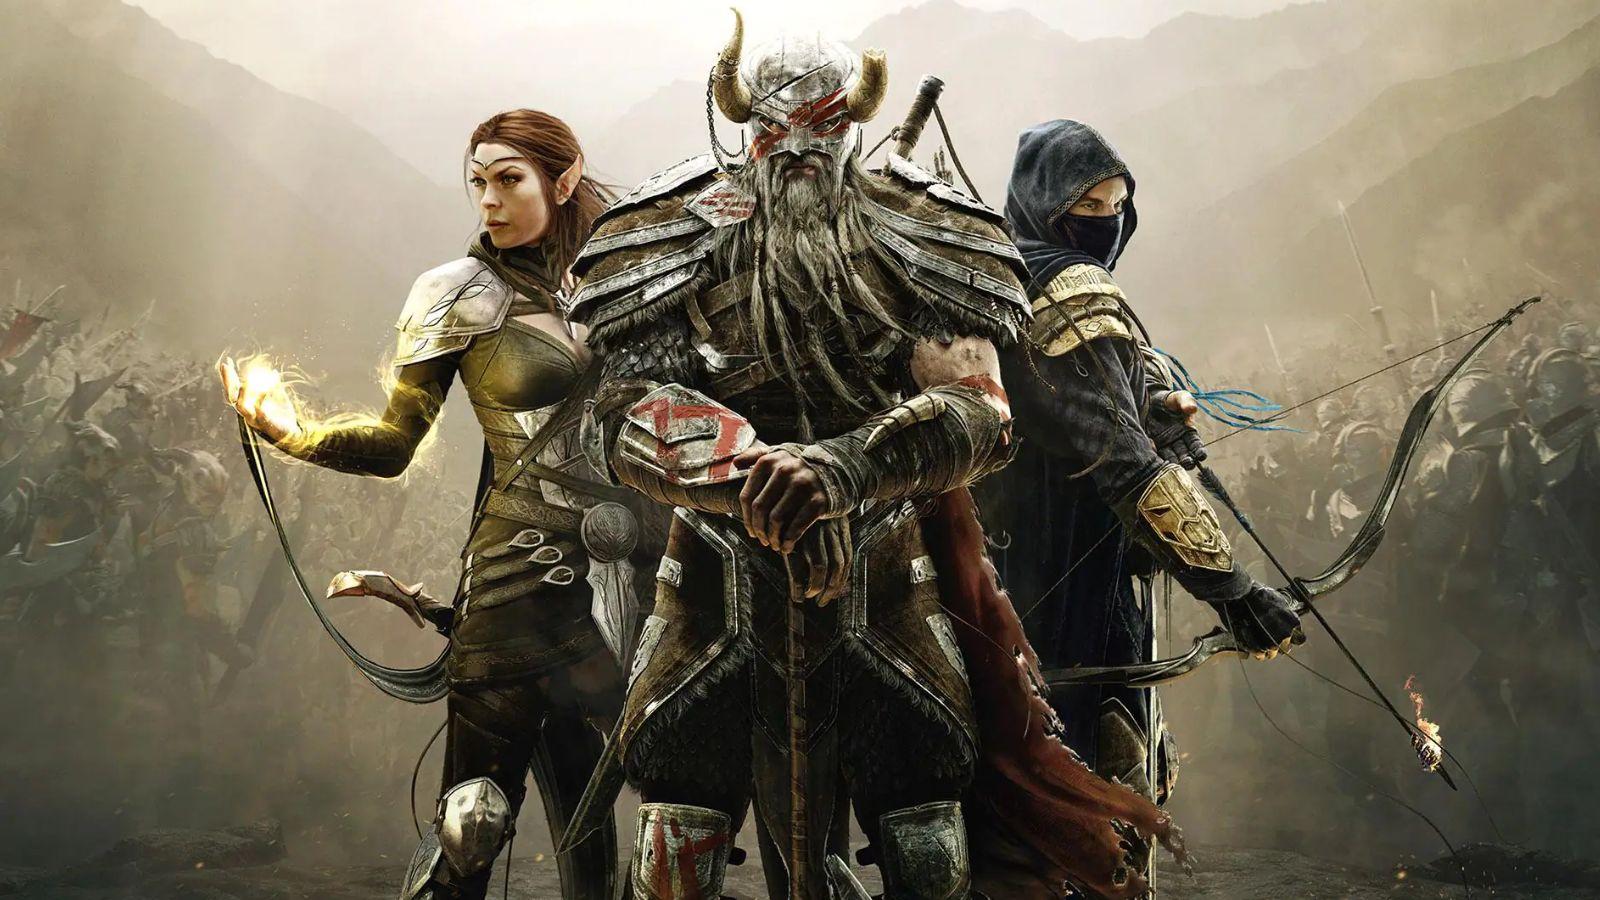 The Elder Scrolls Online on X: Happy Birthday ESO! 🎂 9 years ago today,  we launched #ESO on PC/Mac and have since released 6 Chapters, 23 DLCs, and  37 base game updates.